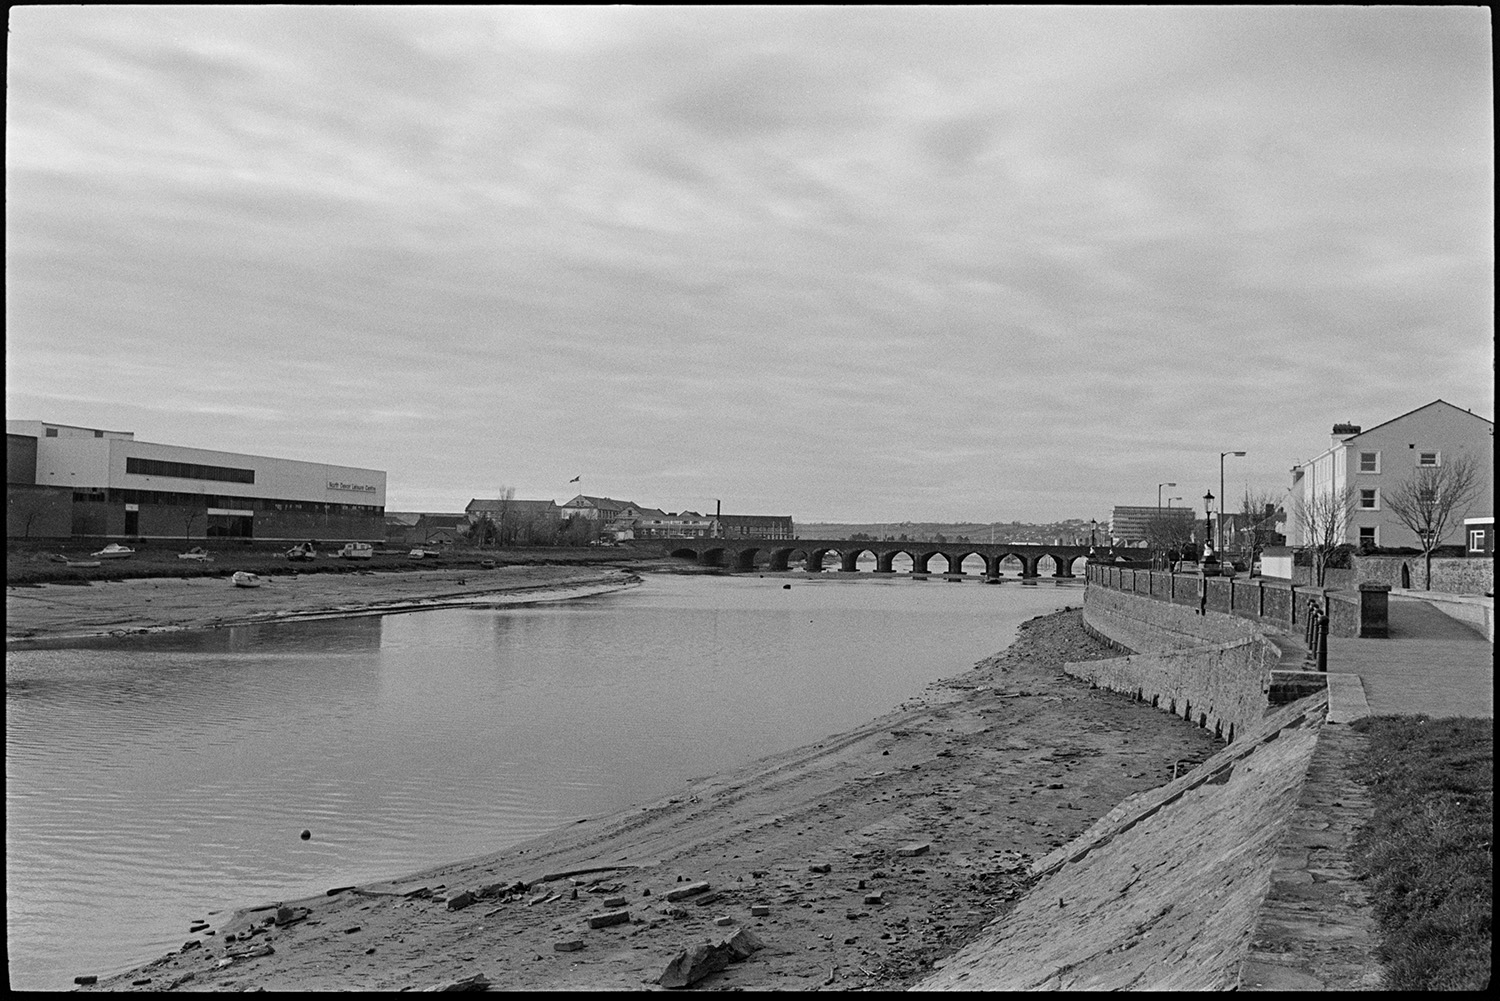 Towpath and bridge over Taw.
[View of the River Taw looking West towards the Long Bridge at Barnstaple with the North Devon Leisure Centre on the southern bank.]